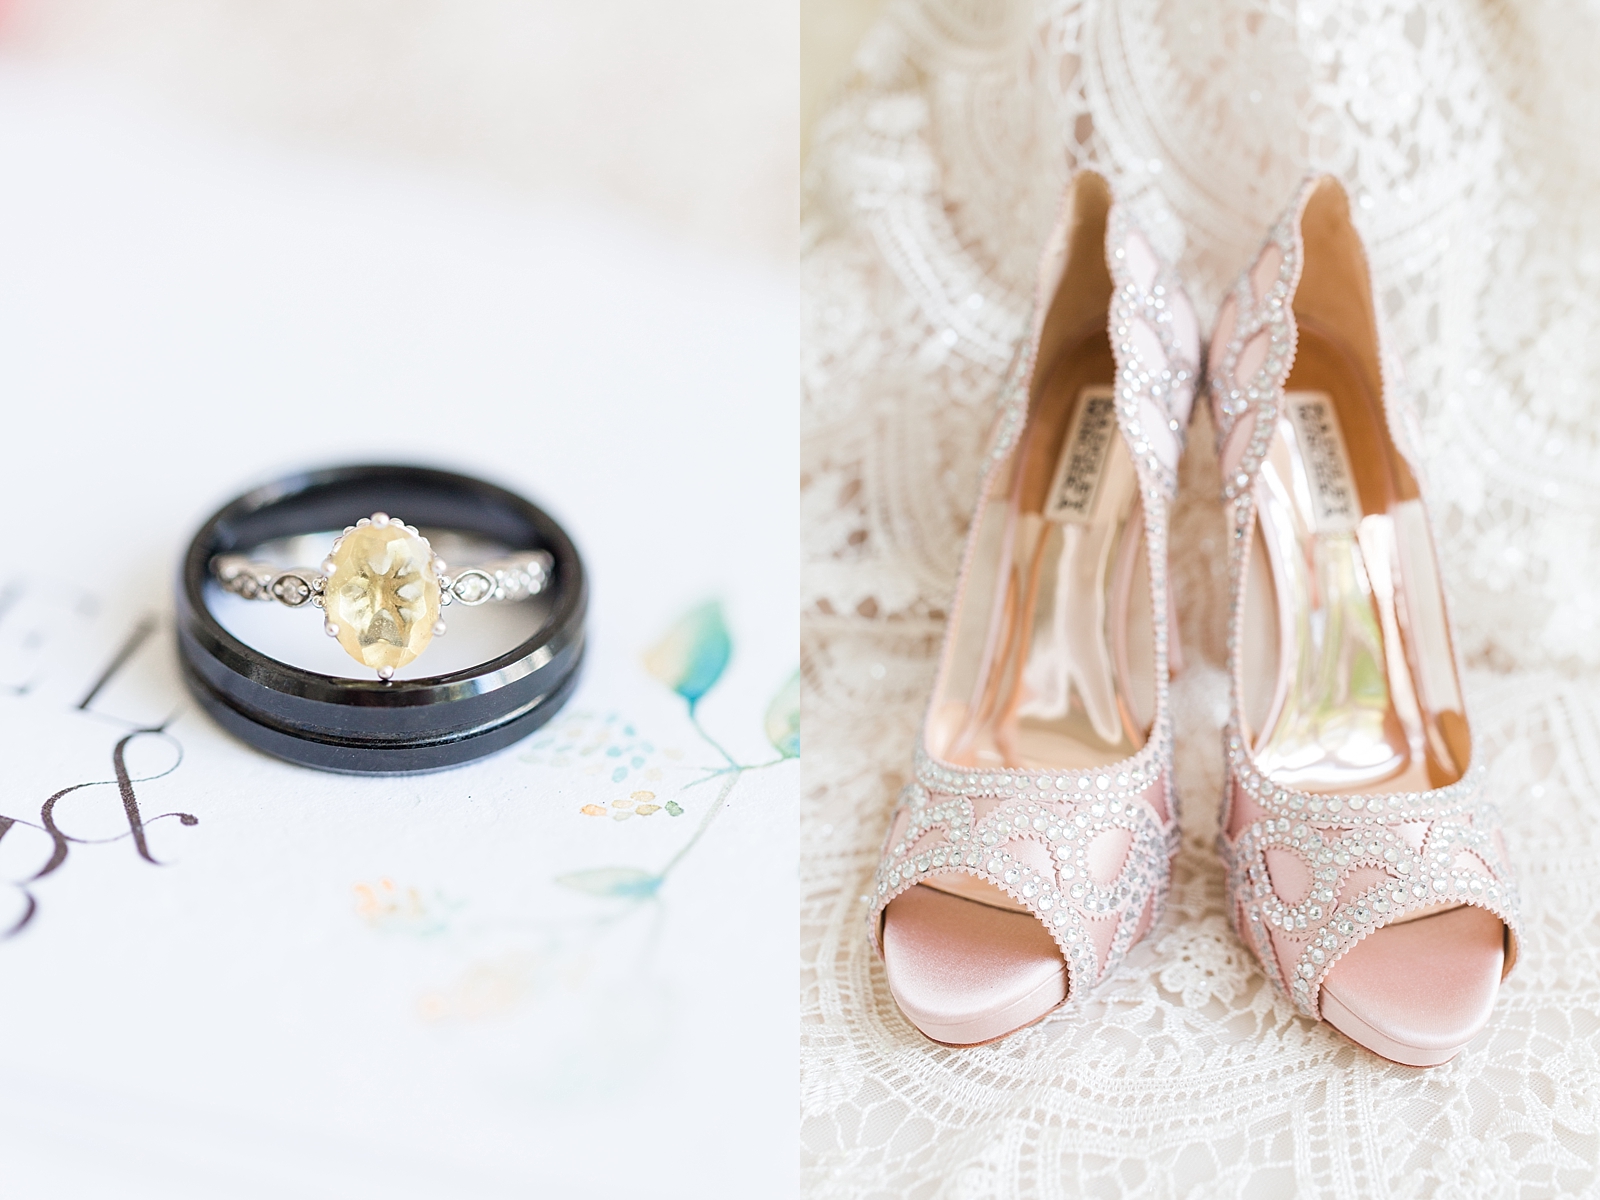 Atlanta Georgia Elopement detail of wedding rings on invitation suite and bridal shoes on lace dress Photos